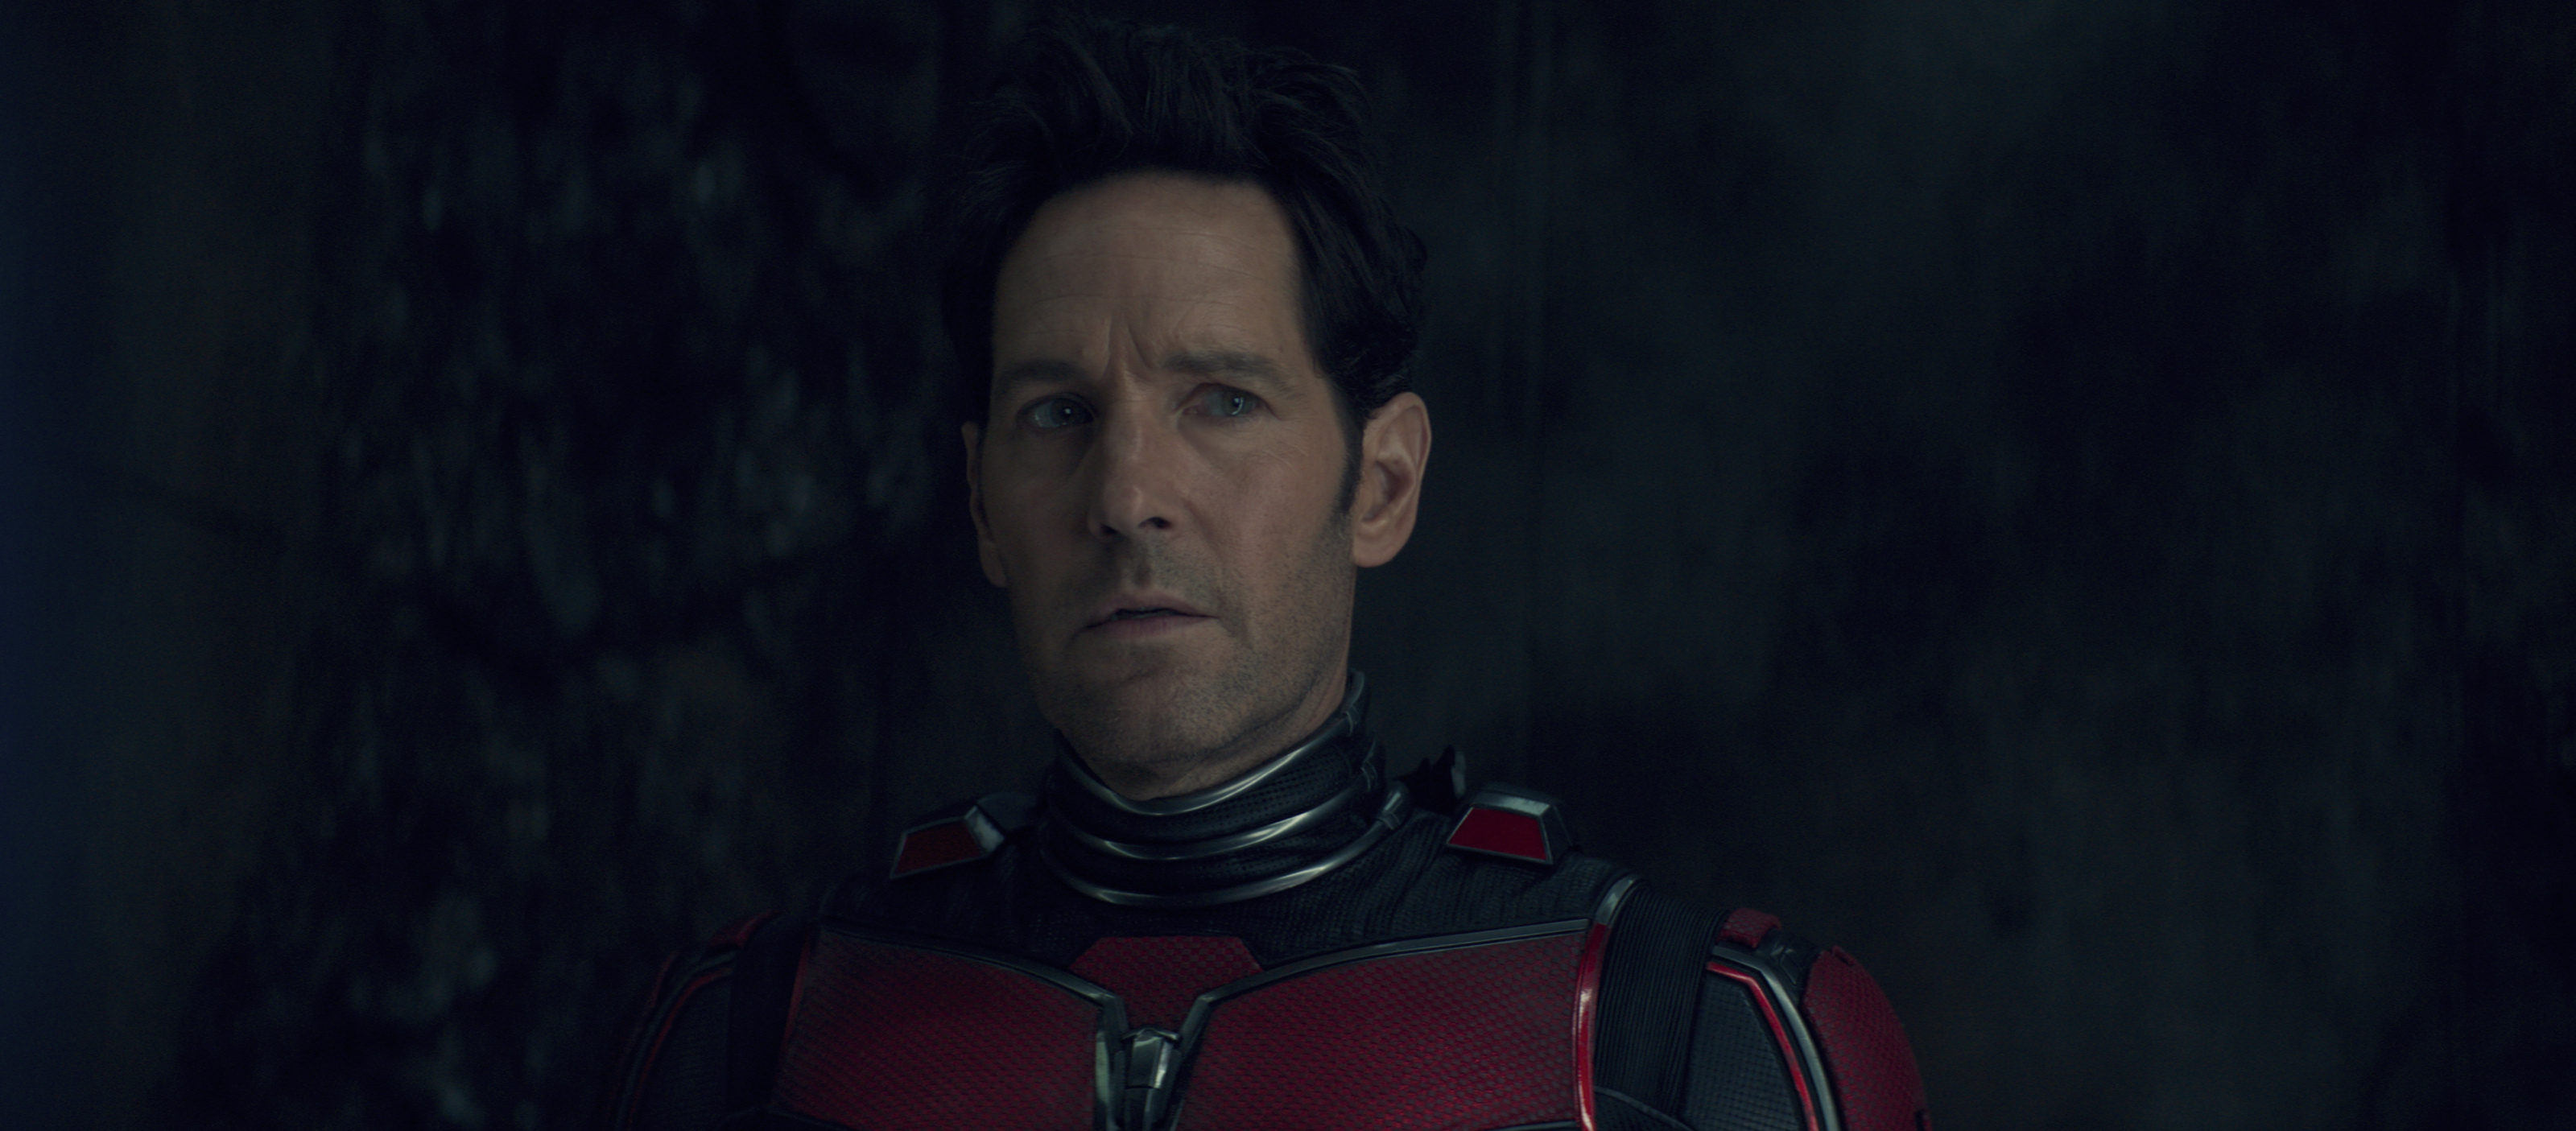 Ant-Man and the Wasp: Quantumania' Trailer Goes Deep Into Quantum Realm -  CNET